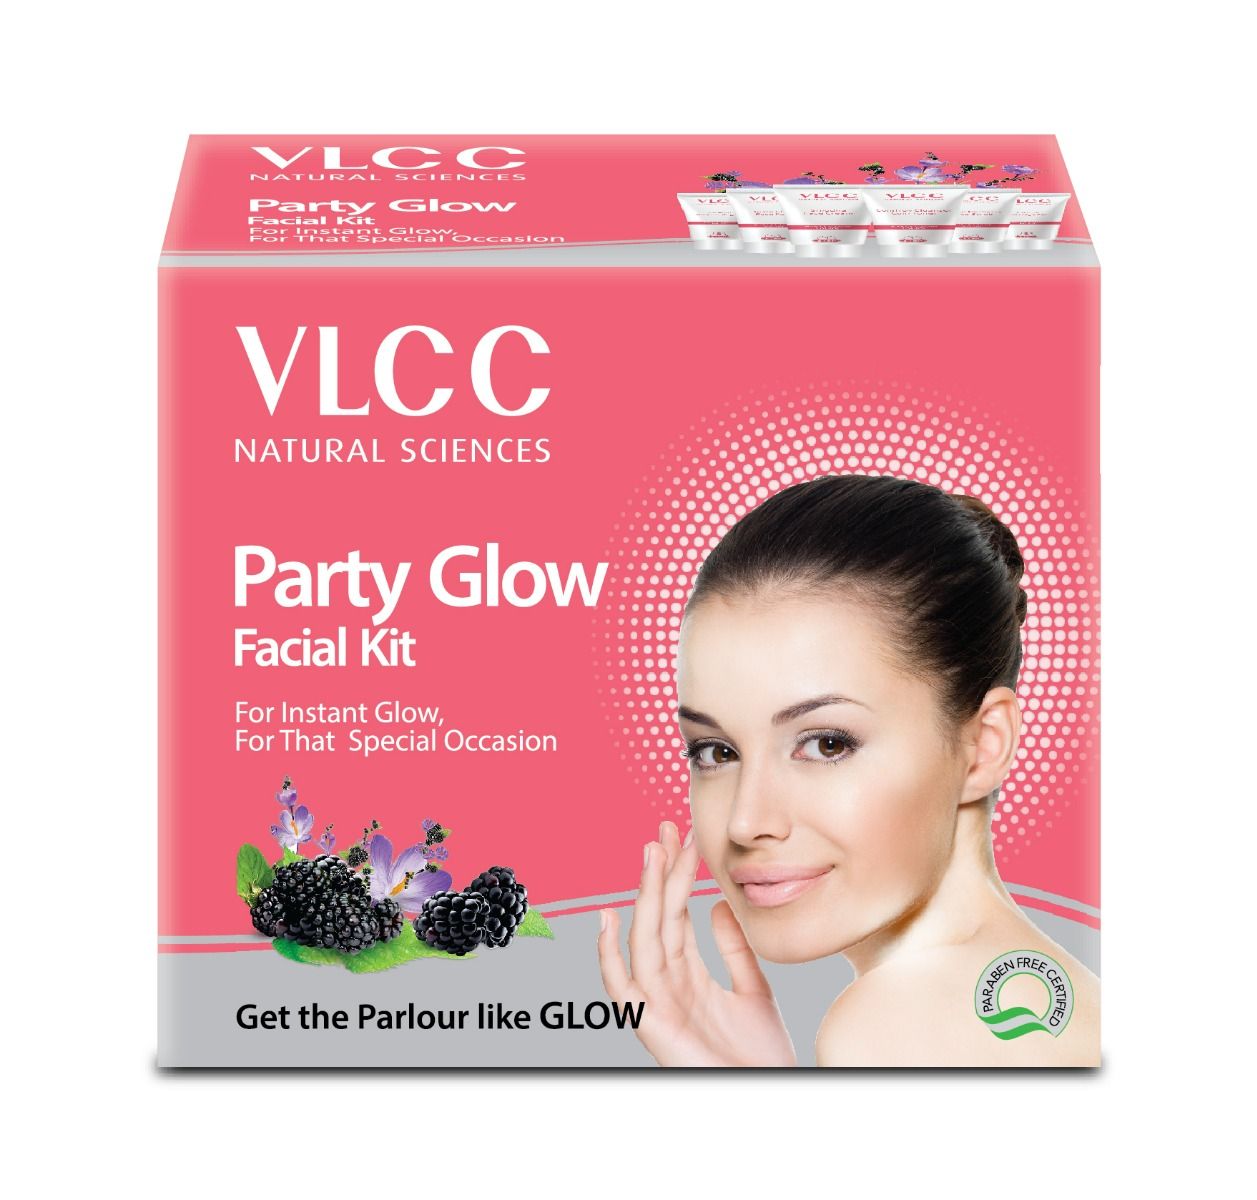 Buy VLCC Party Glow Facial Kit, 1 Count Online